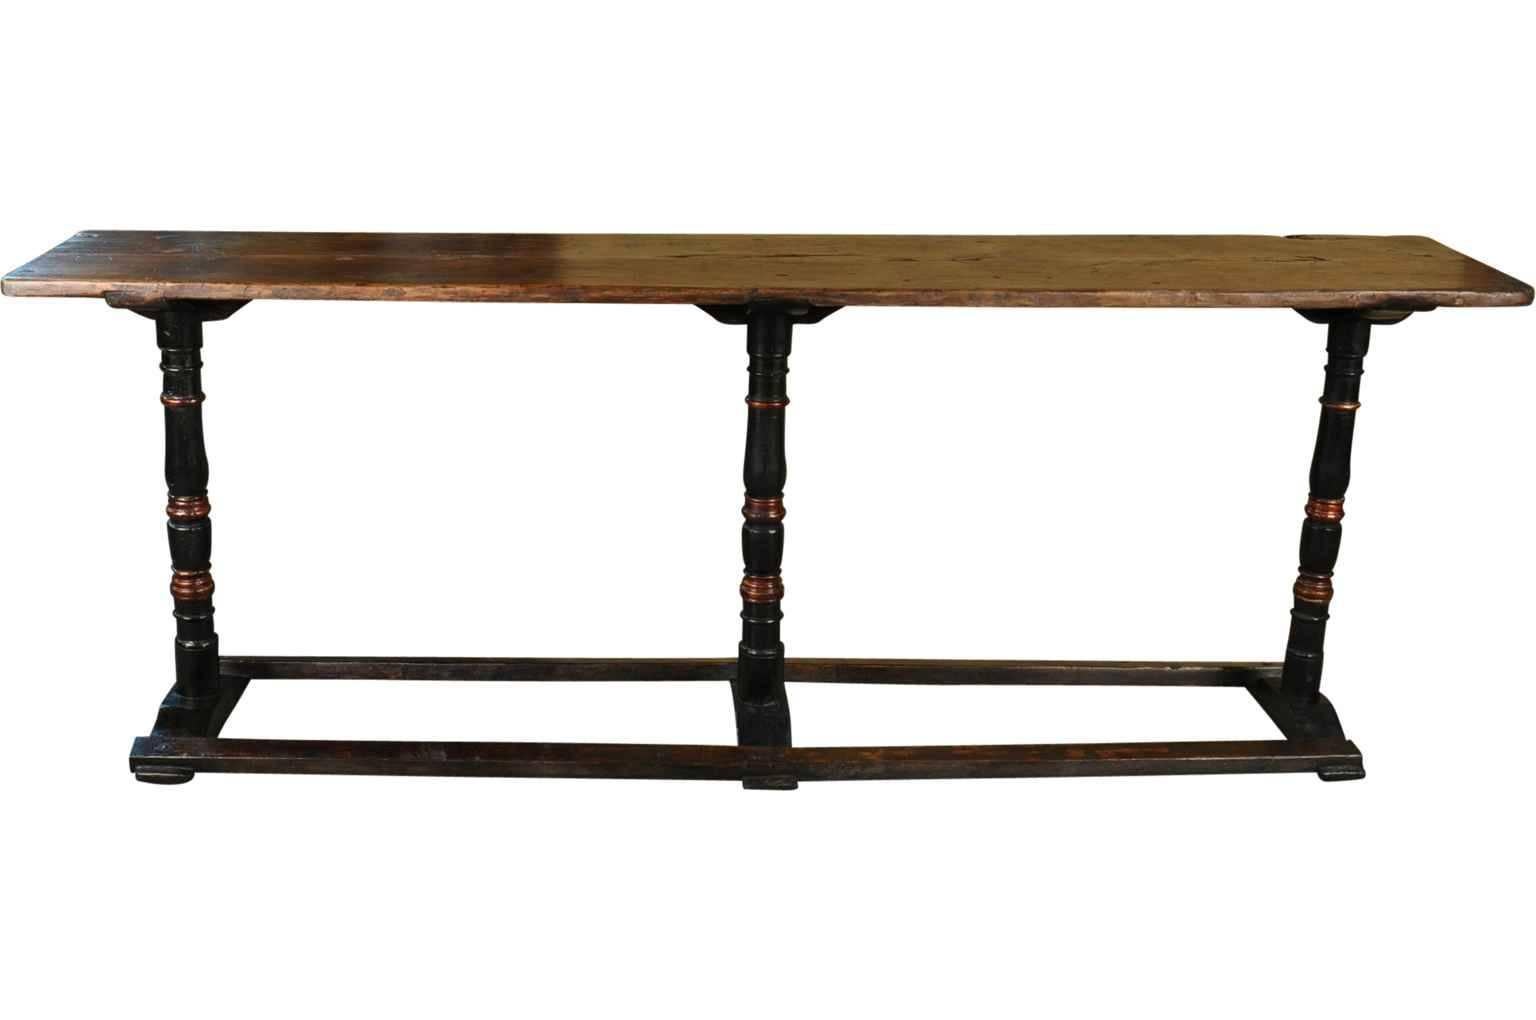 A very handsome 18th century long console table in painted wood. Its unique design and its wonderful patina make this console a wonderful accent piece.